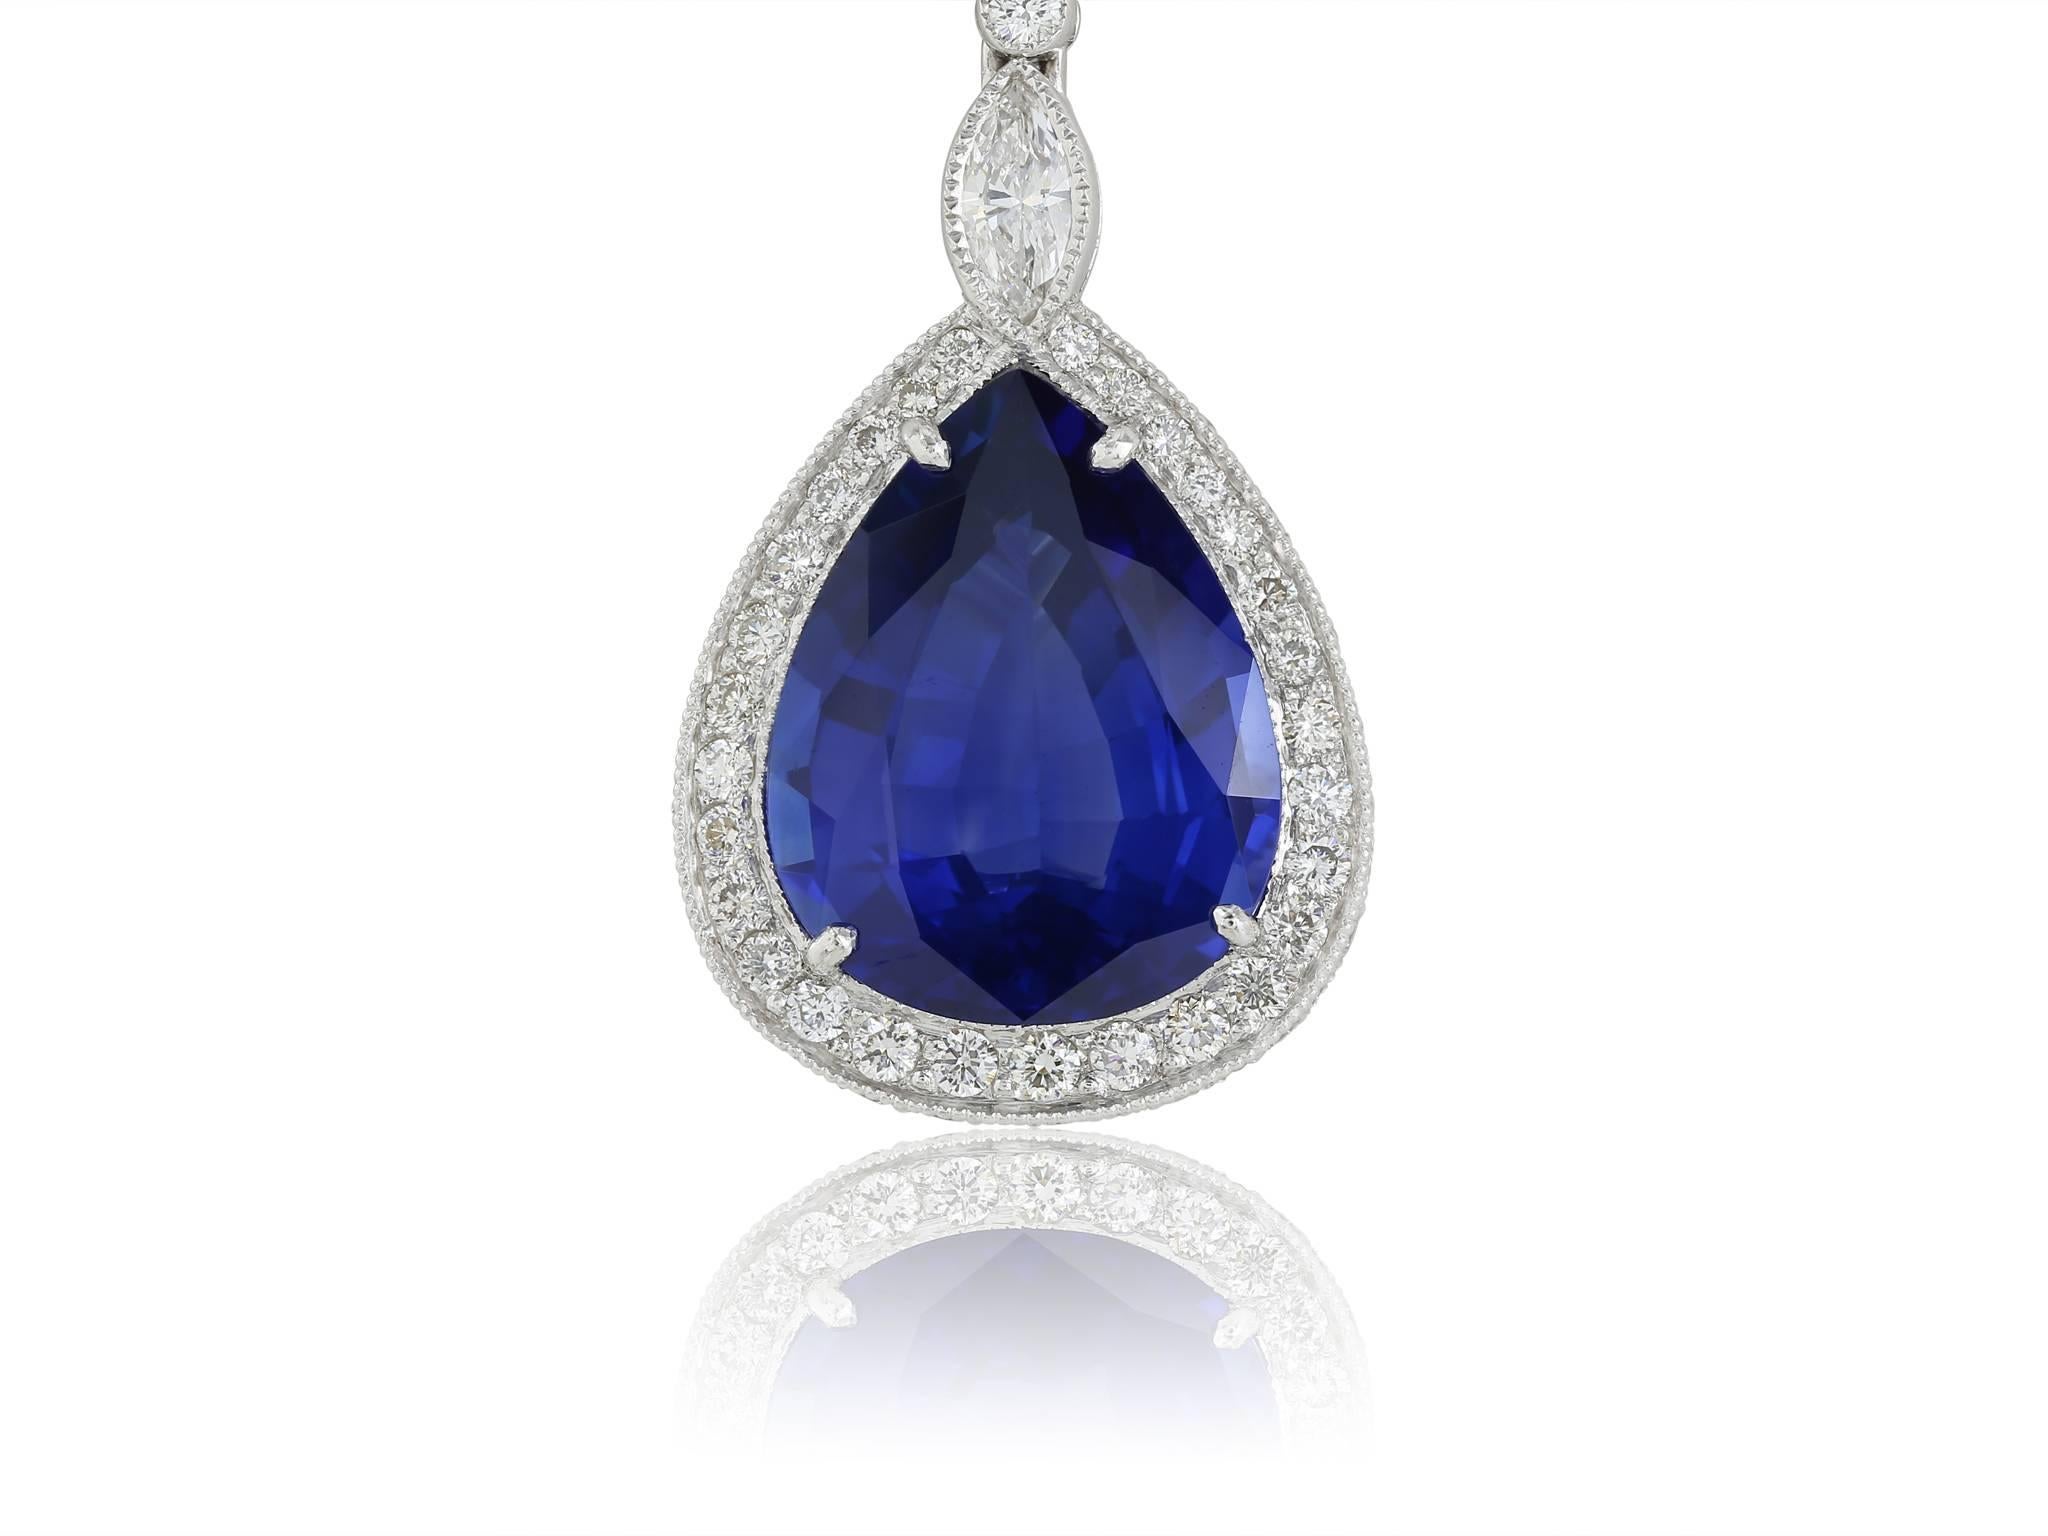 Platinum, diamond and sapphire drop earrings.  Consists of 2 pear shaped  fine blue ceylon sapphires t.w.= 12.10 carats.  Surrounding sapphires are small round brilliant cut diamonds attached to a bezel set round diamond.  Total diamond weight 1.81